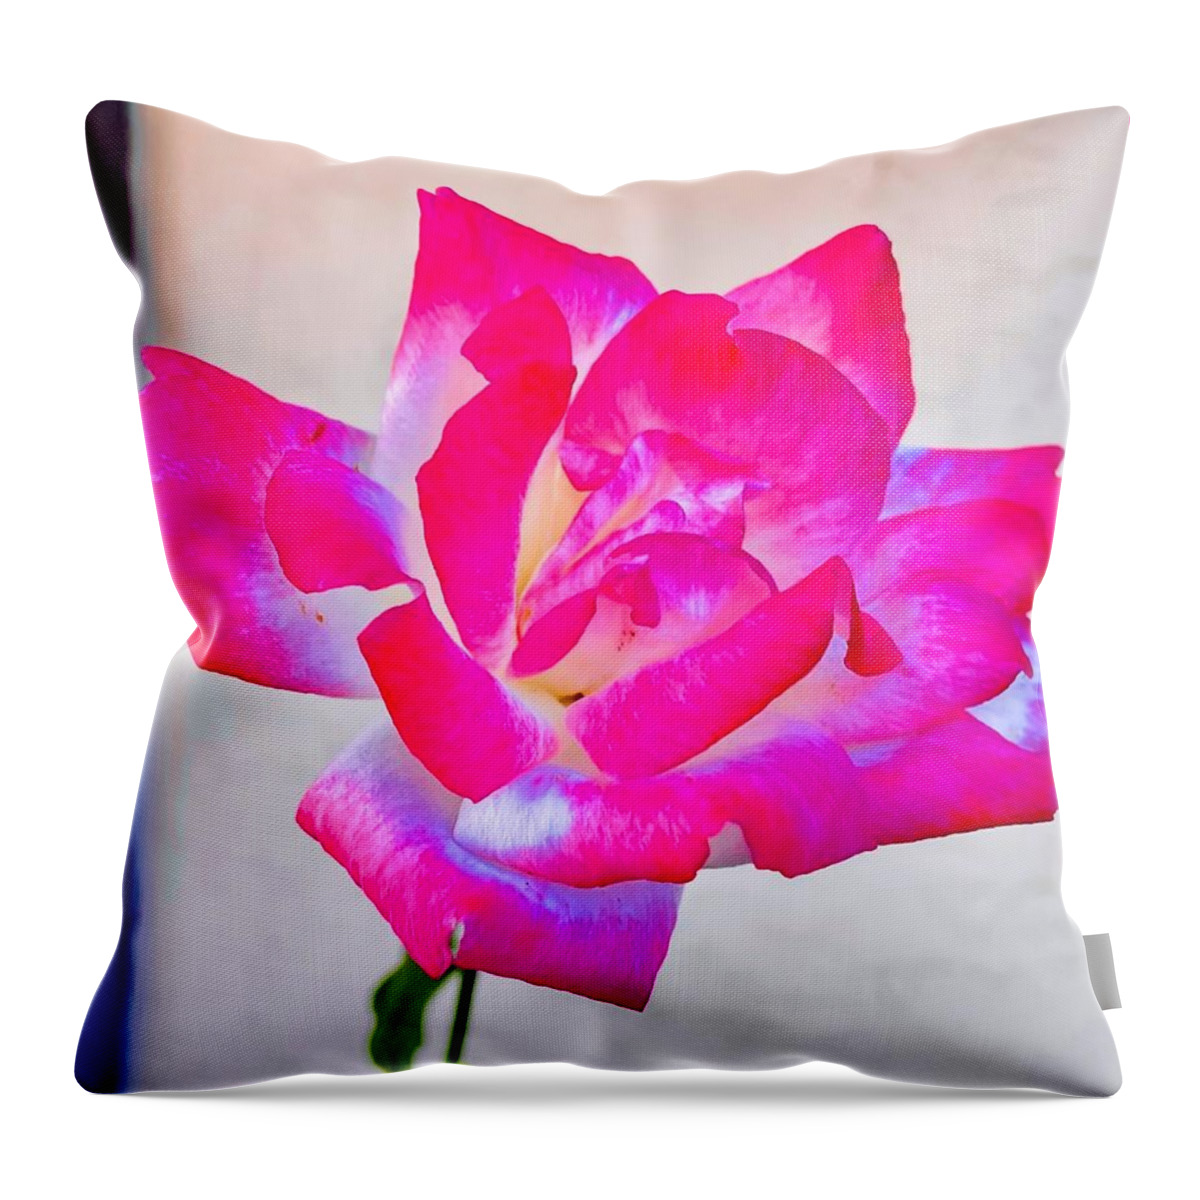 Flowers Throw Pillow featuring the photograph Roses by John Anderson